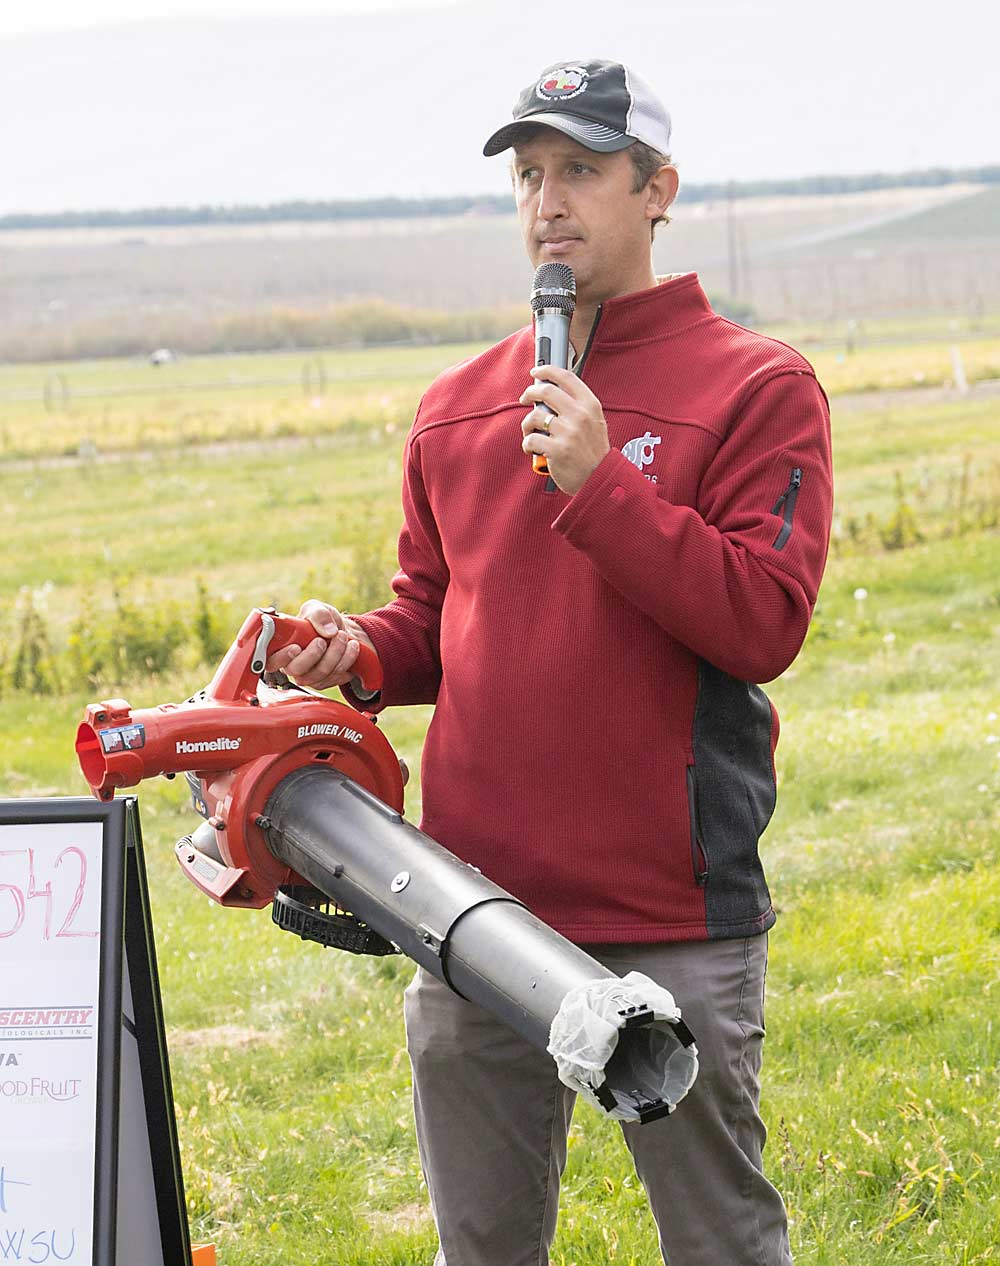 Washington State University entomologist Tobin Northfield shows how he uses a leaf blower, running backward and outfitted with a paint bag, to suction up leafhoppers from perennial weeds on the orchard floor during a field day WSU organized at the Roza research farm on Oct. 9 to share the latest findings on management of the leafhoppers that are vectors for X disease. (Kate Prengaman/Good Fruit Grower)